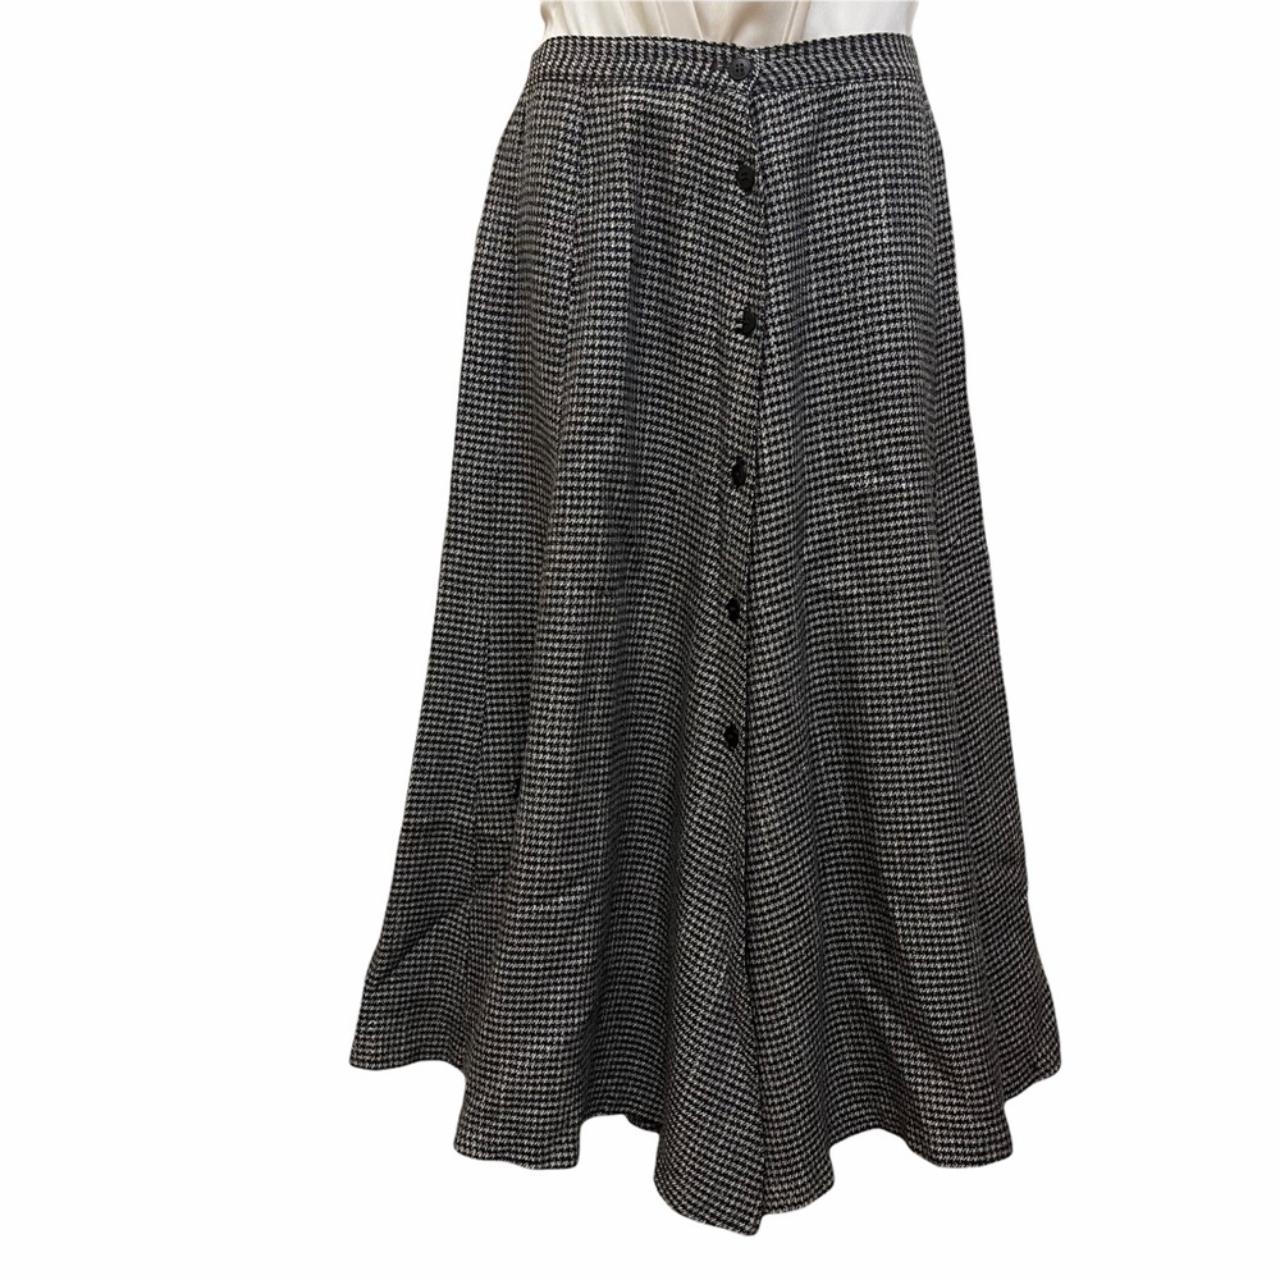 A. Saks Women's Brown and Black Skirt